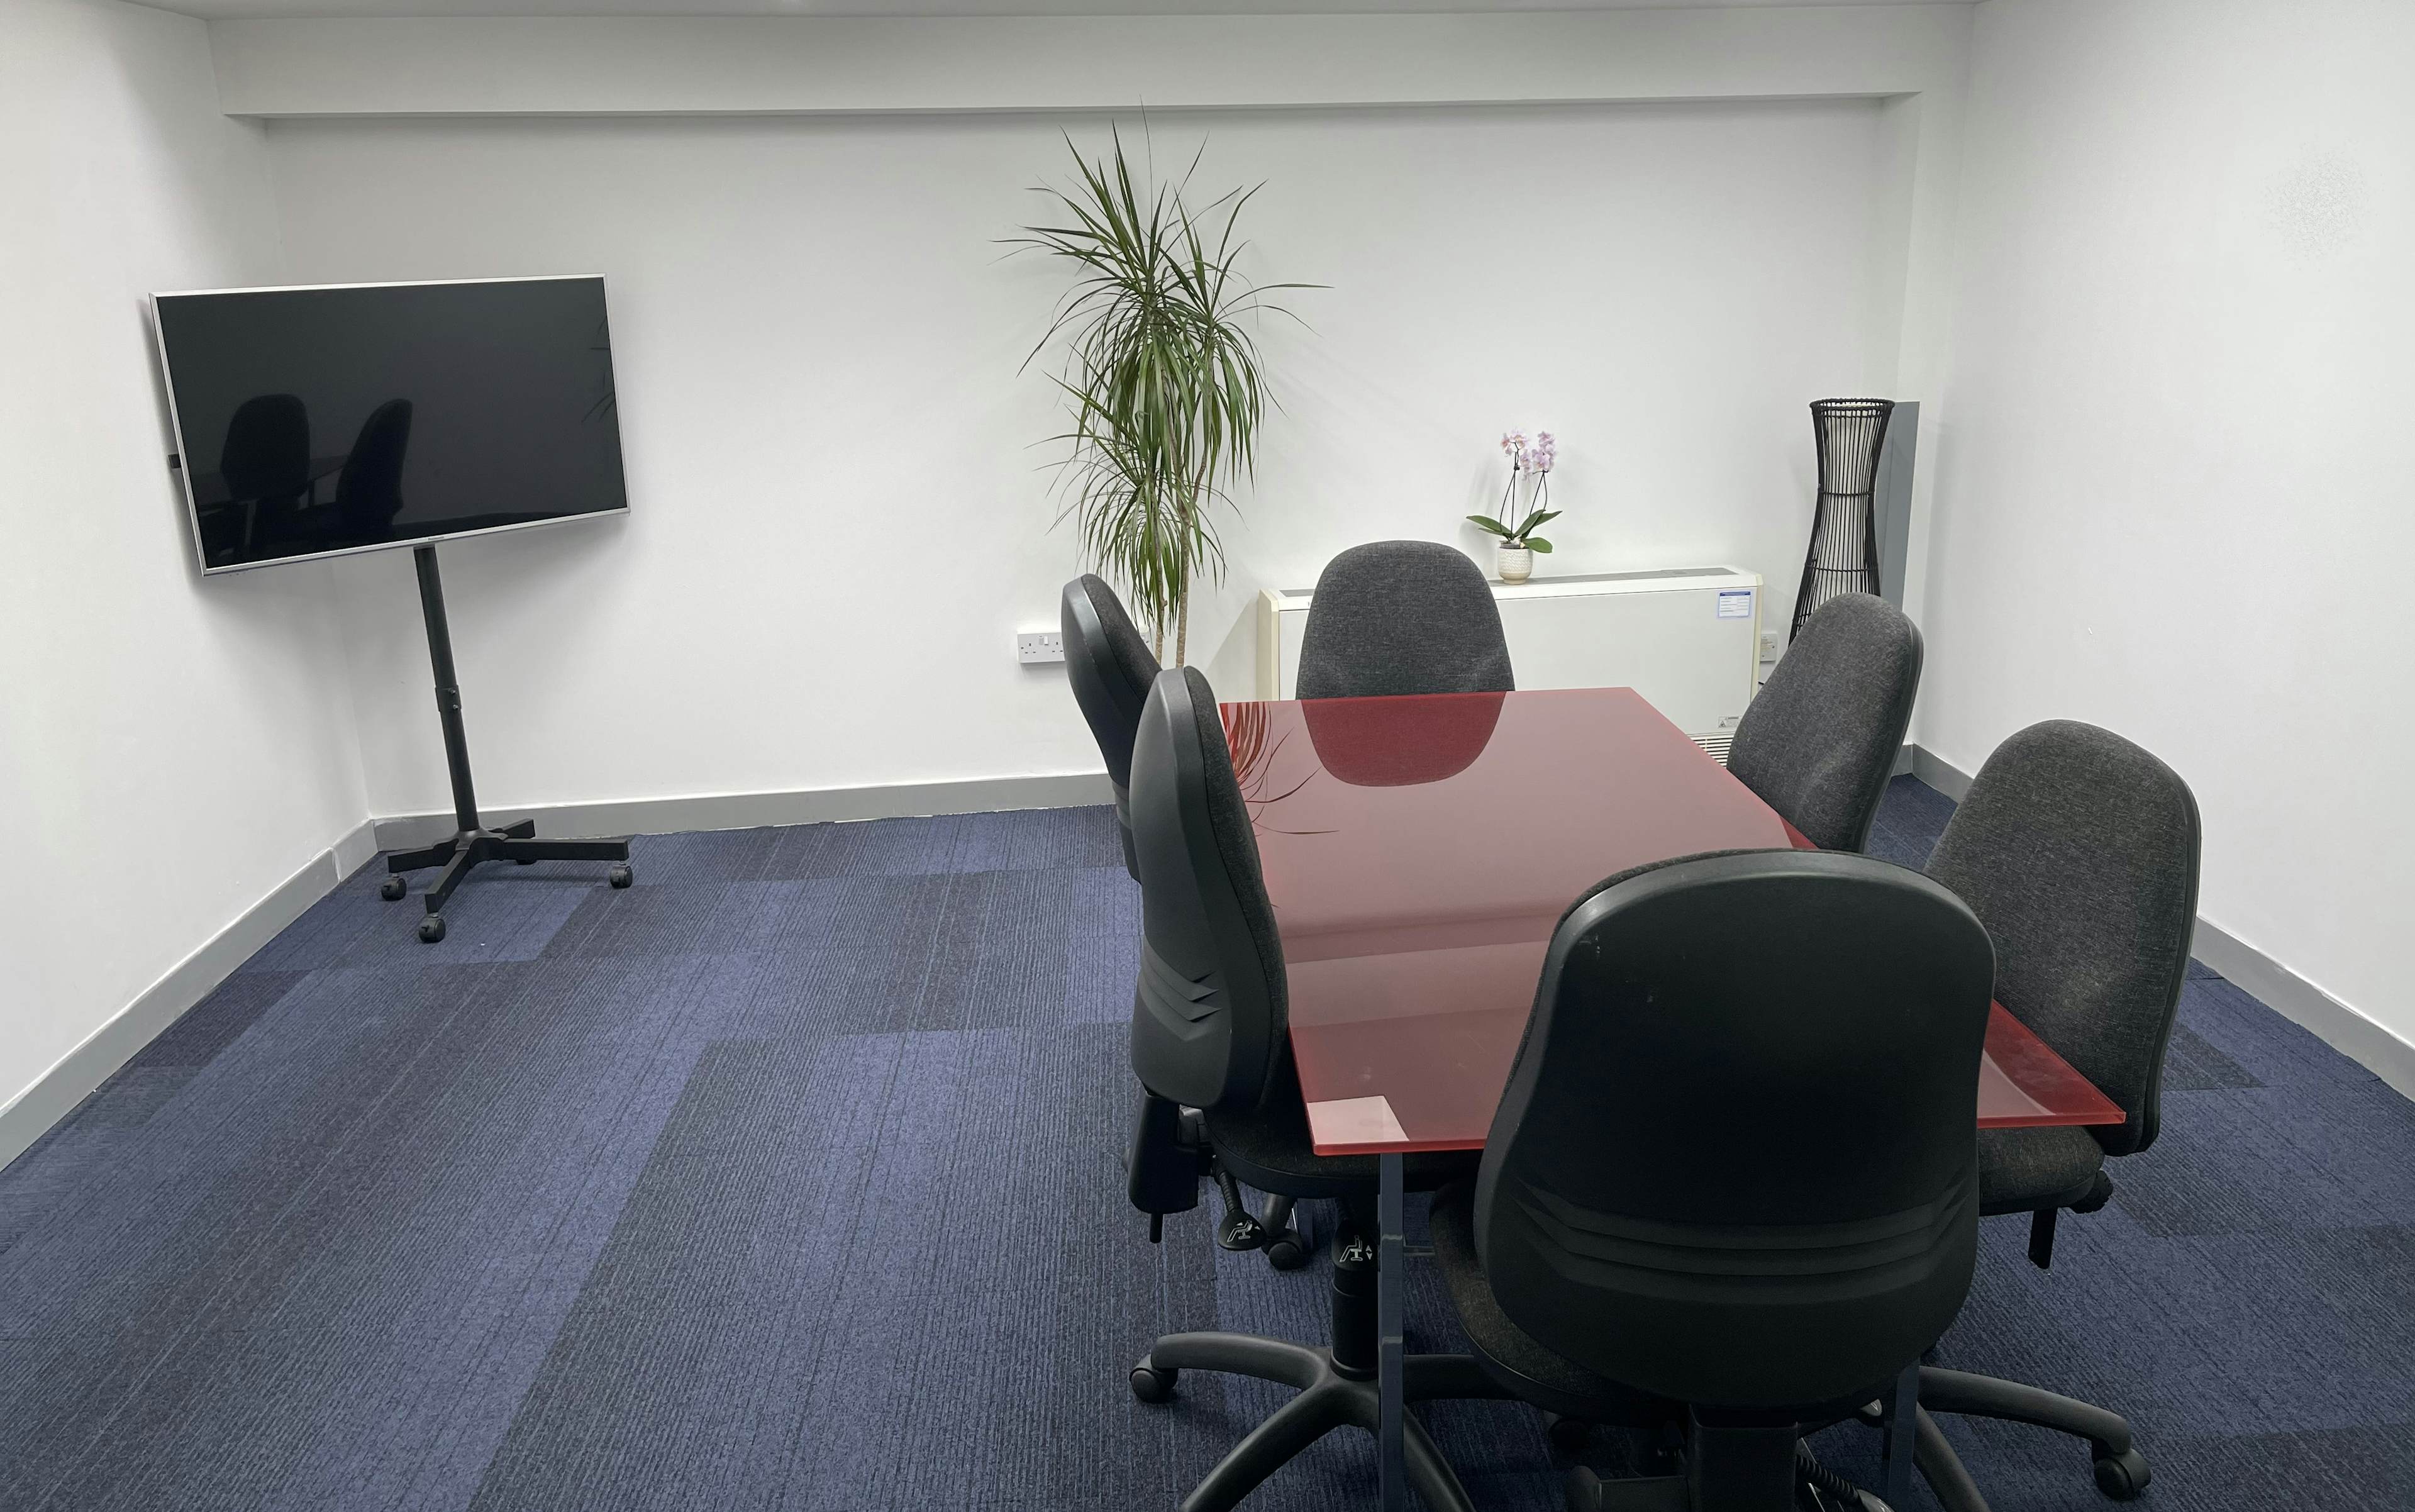 Exhibition House - The Boardroom image 1